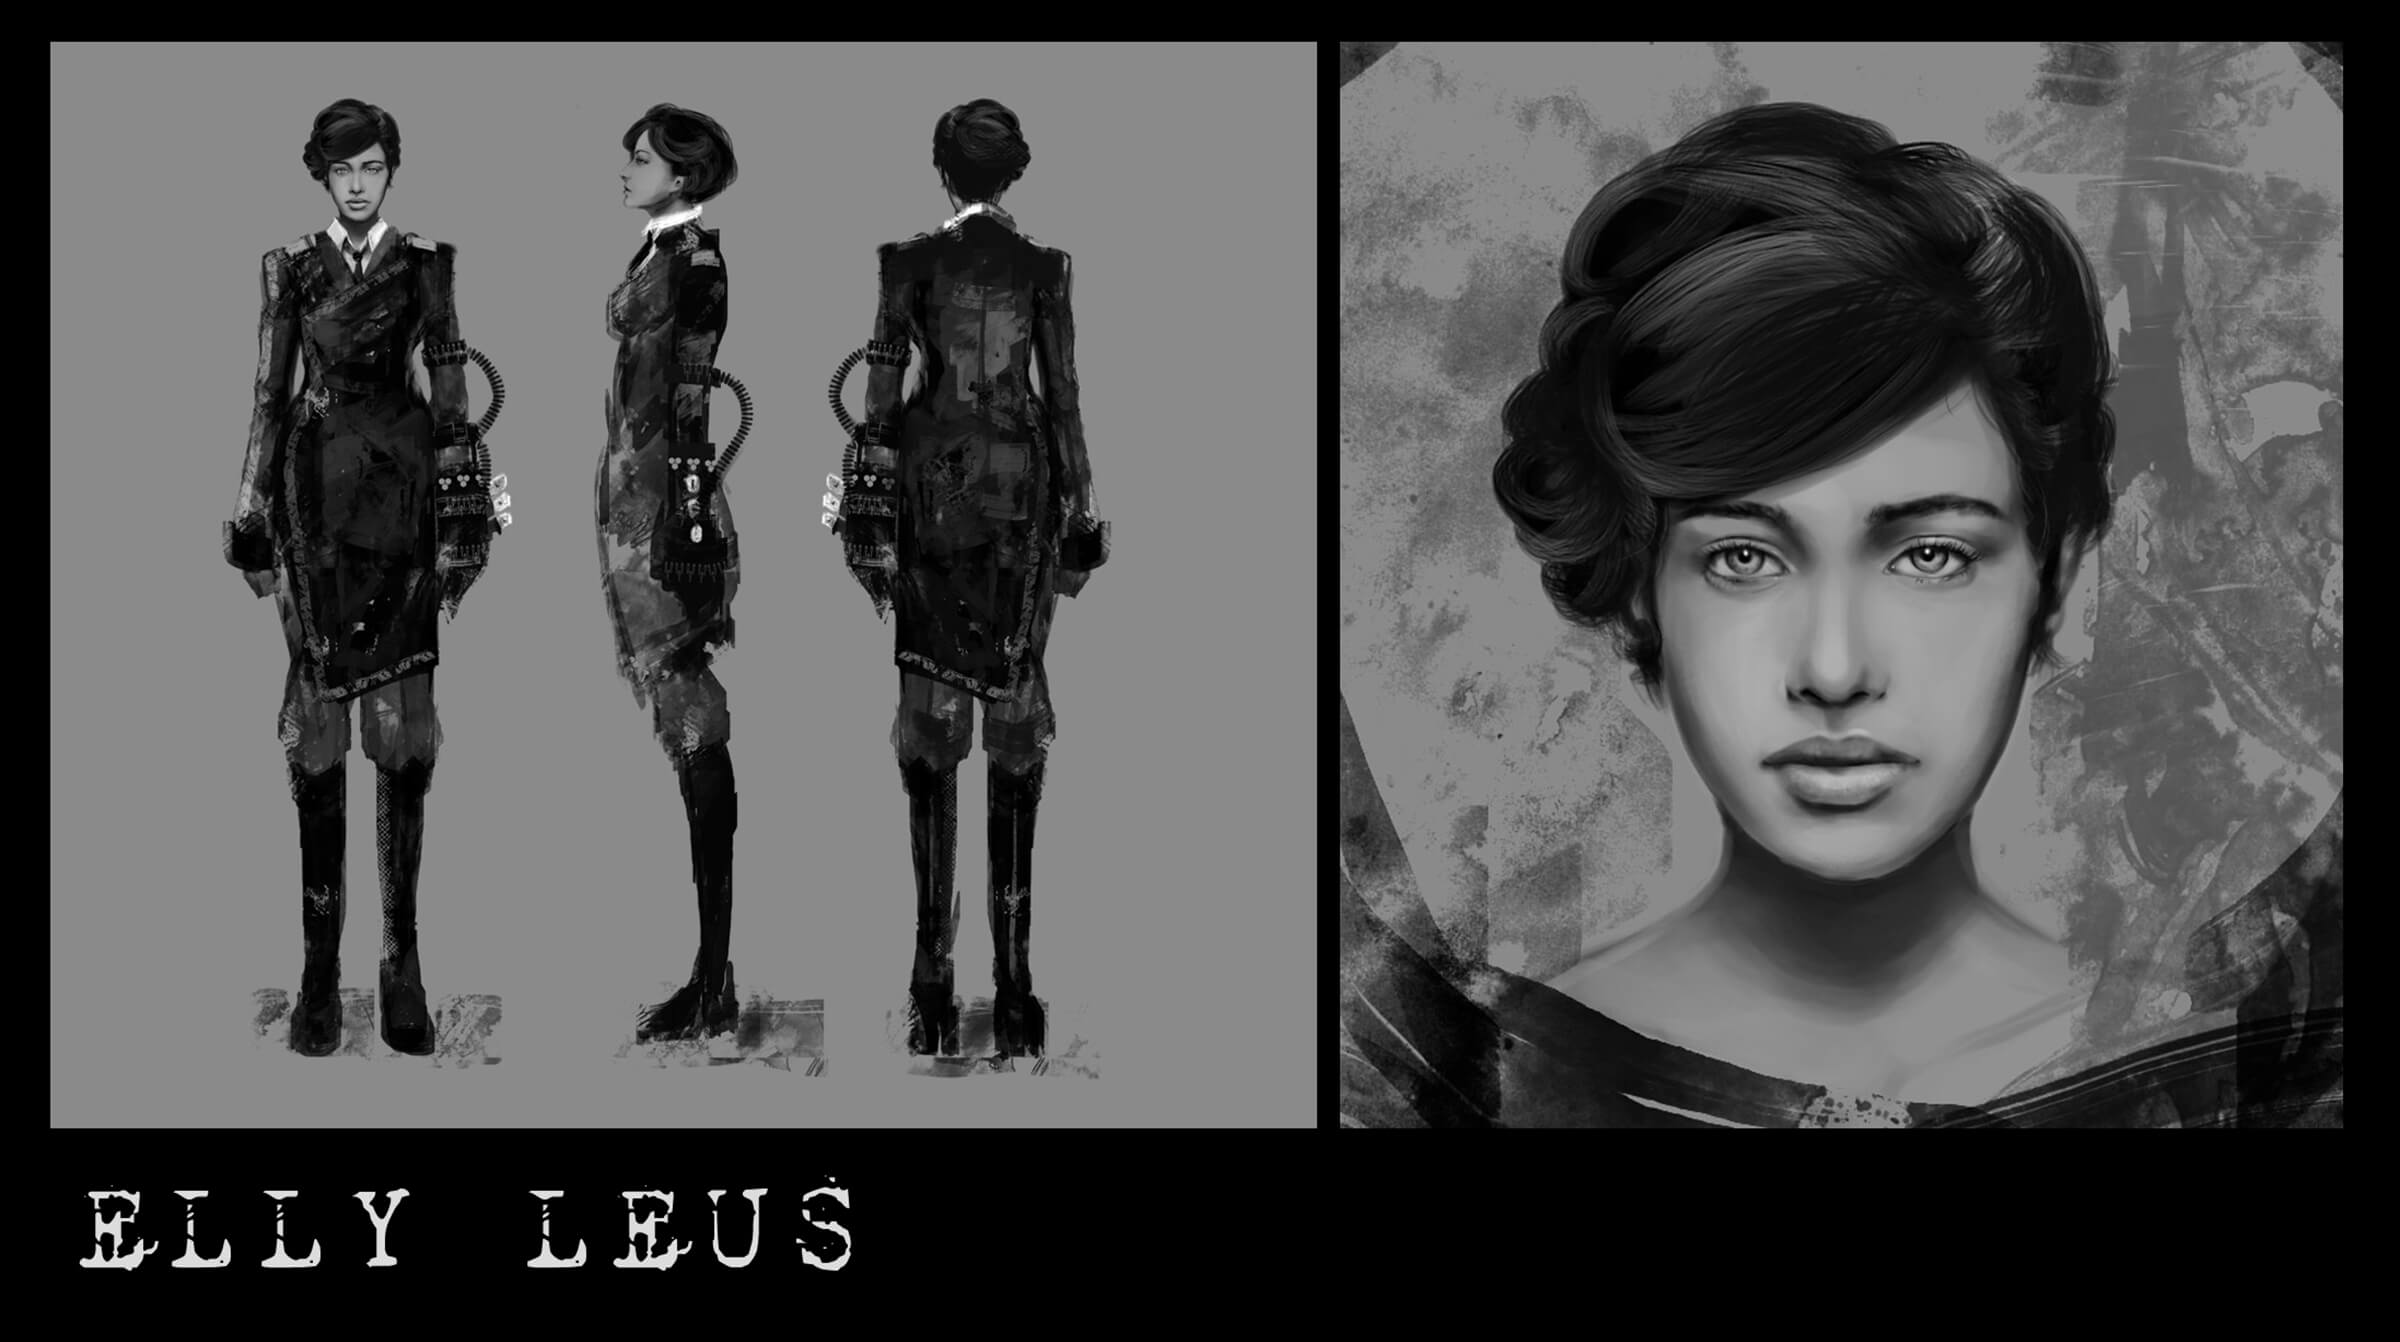 Character sketch and portrait of Elly Leus, a woman with a mid-century hairstyle and wielding a cyberpunk arm attachment.